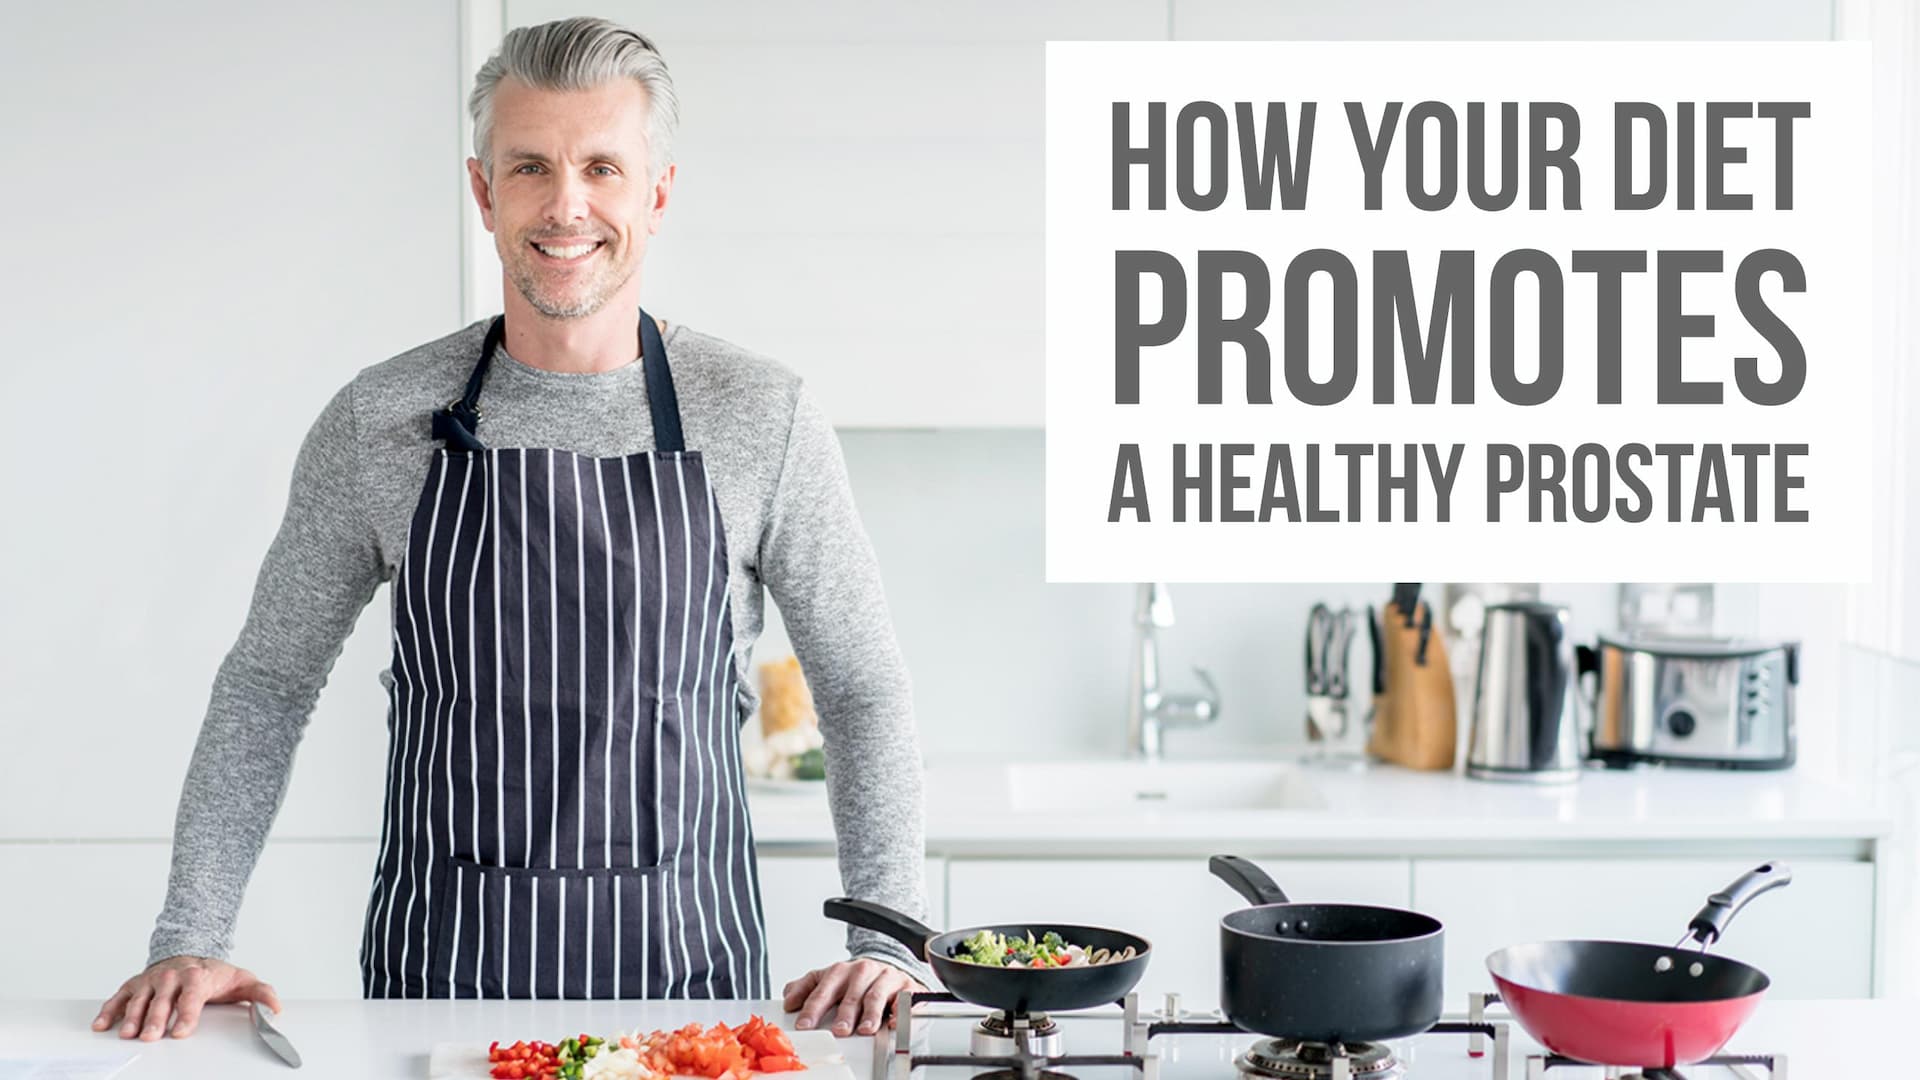 How Your Diet Promotes a Healthy Prostate